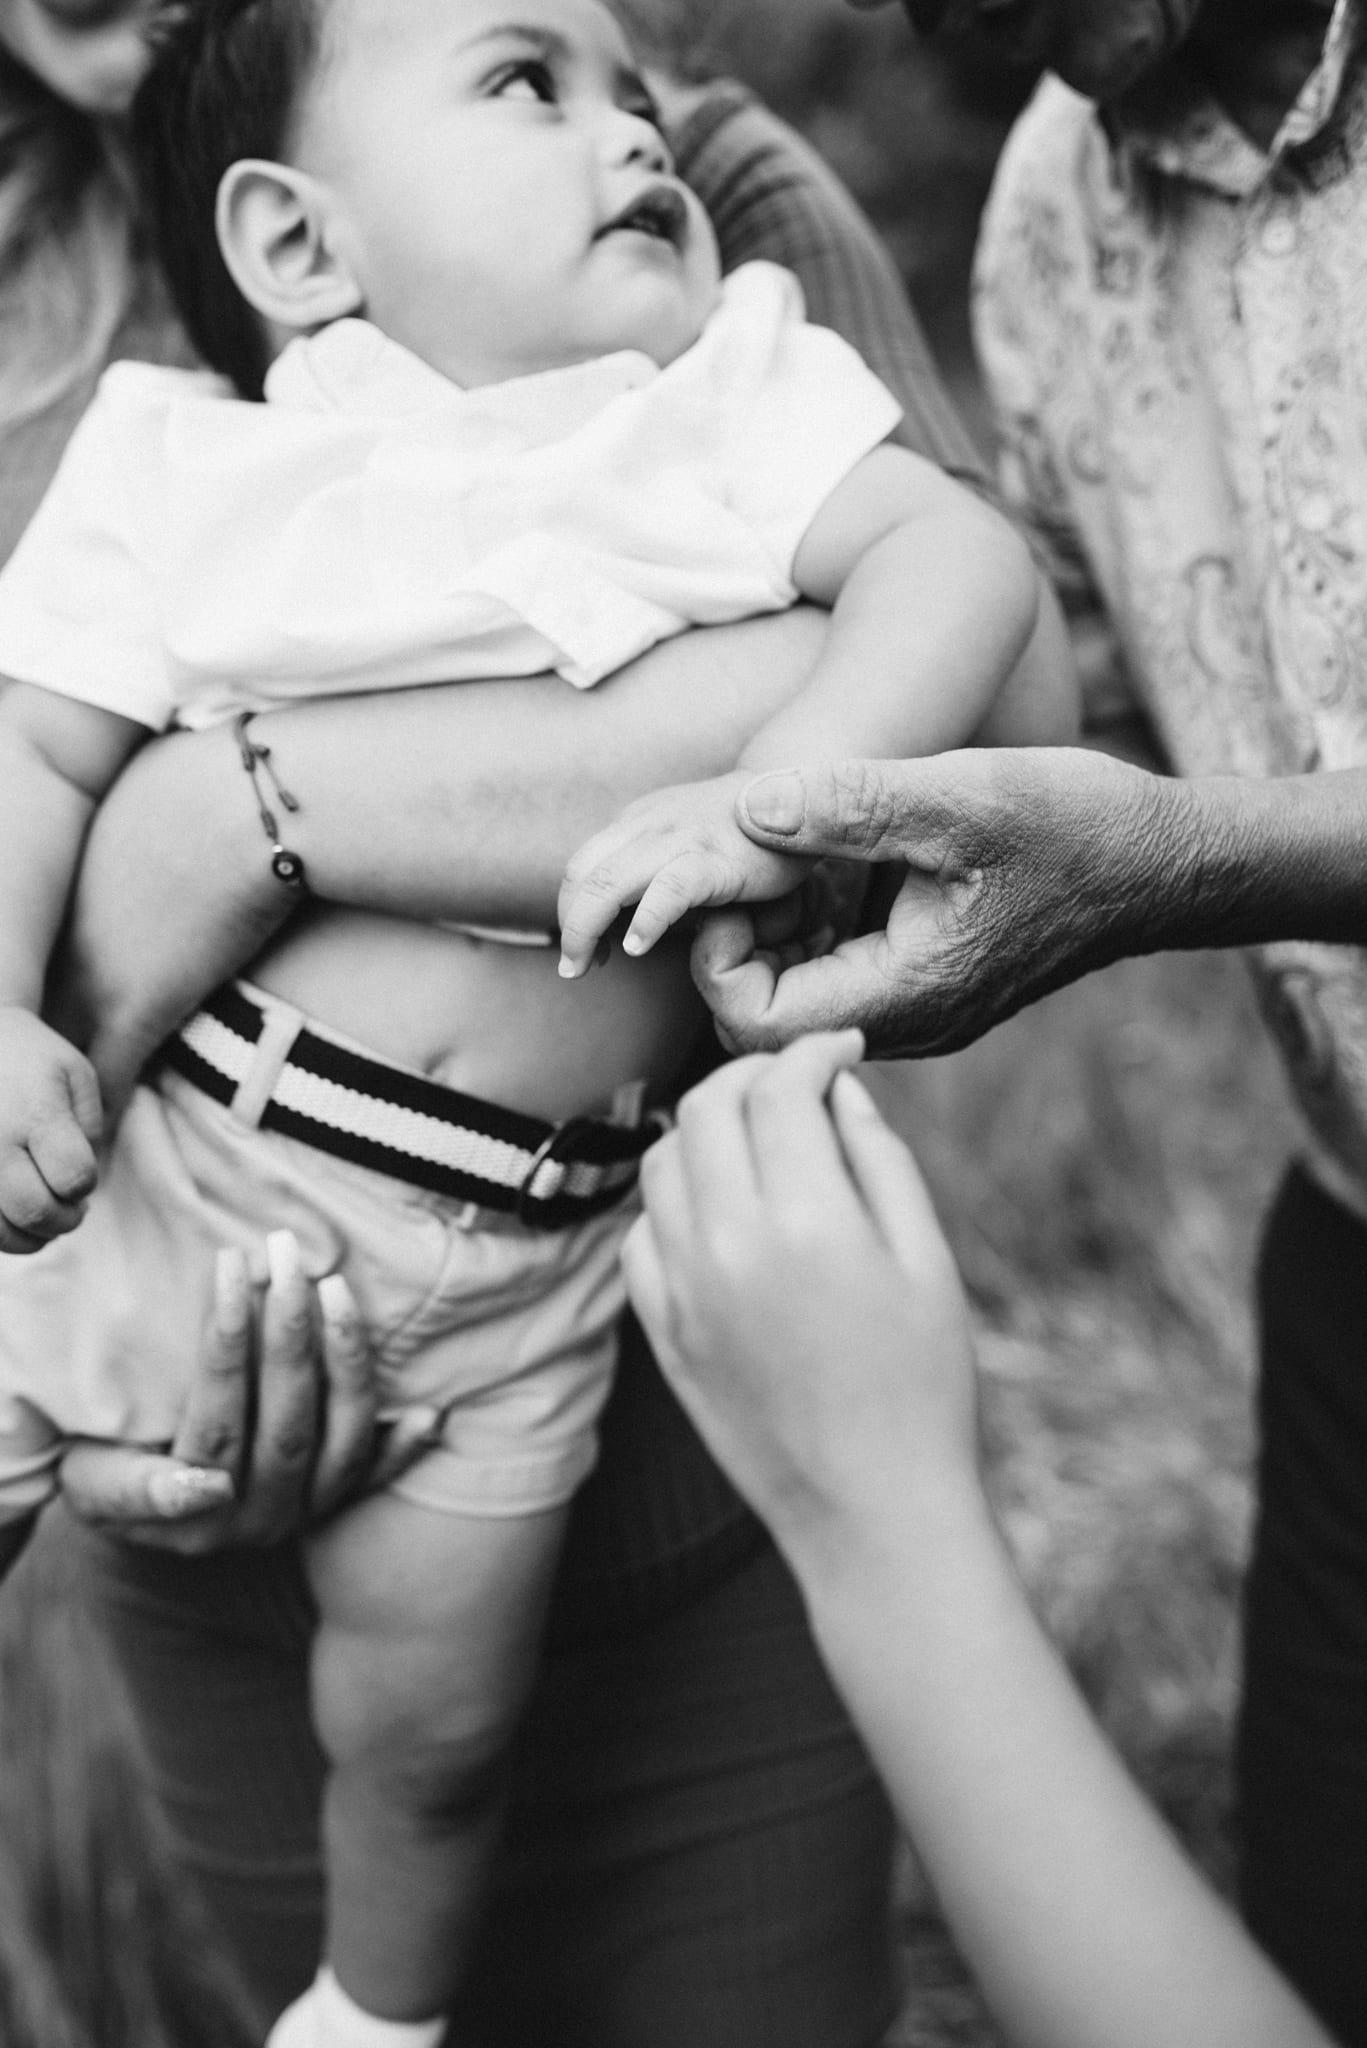 Multiple hands reaching for baby